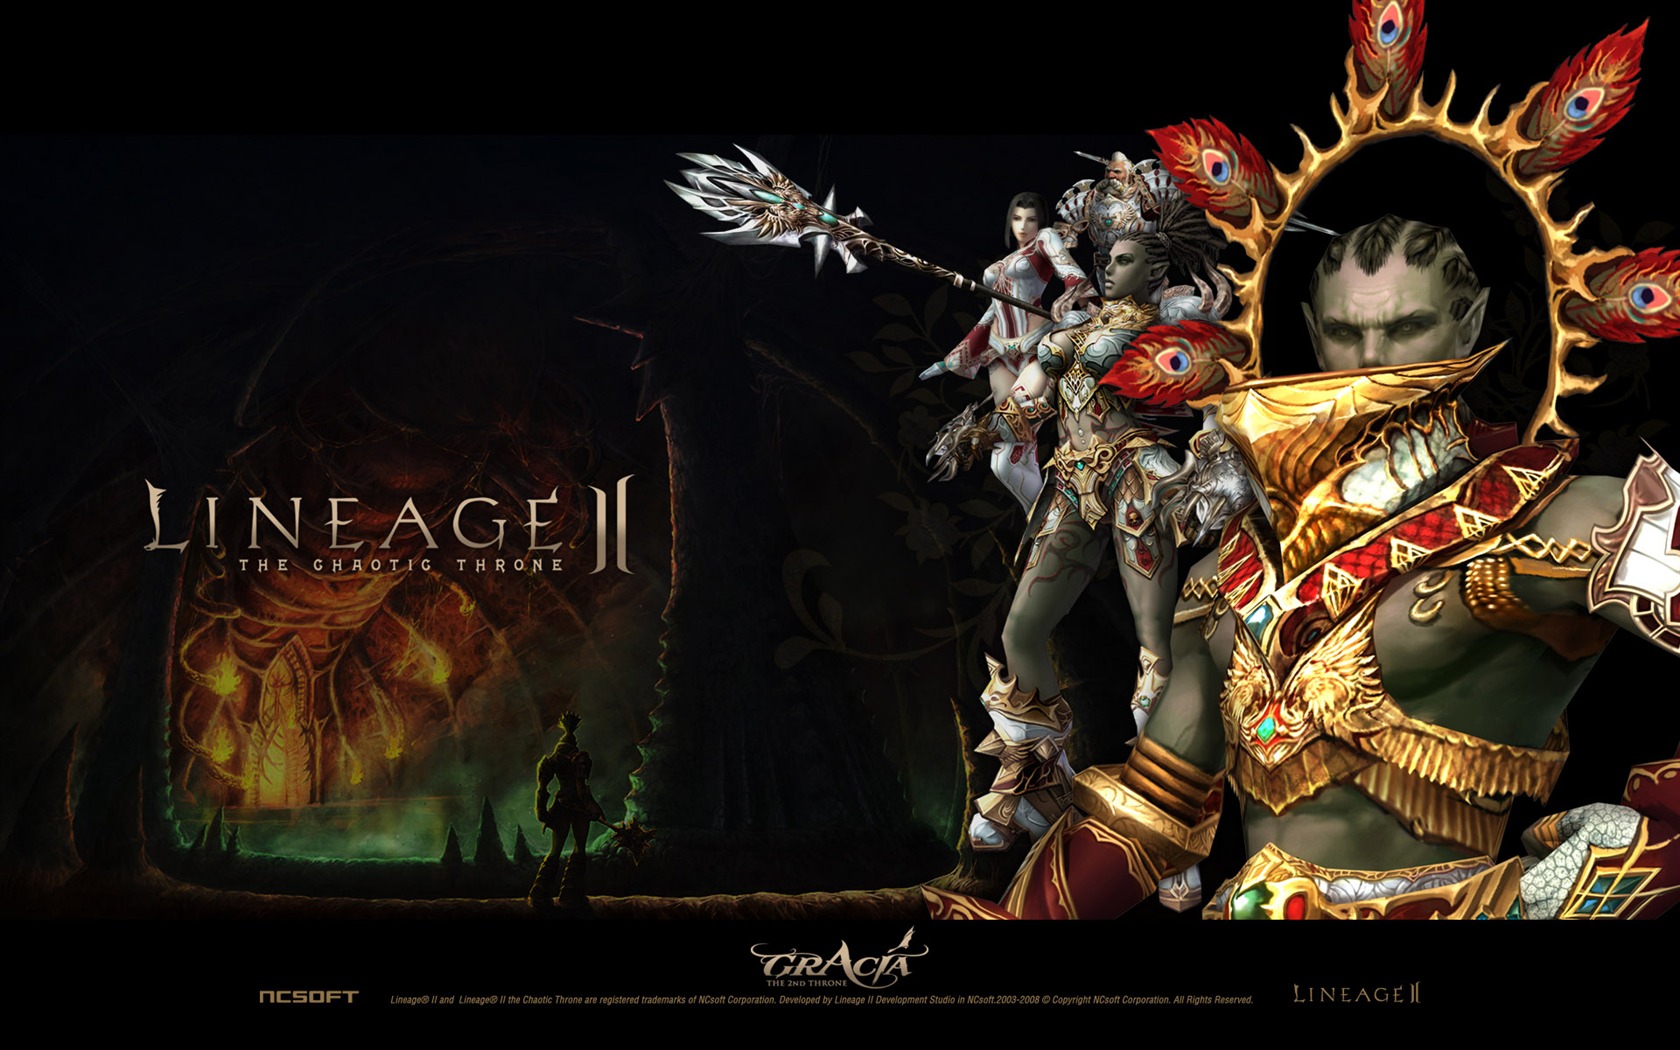 LINEAGE Ⅱ modeling HD gaming wallpapers #2 - 1680x1050